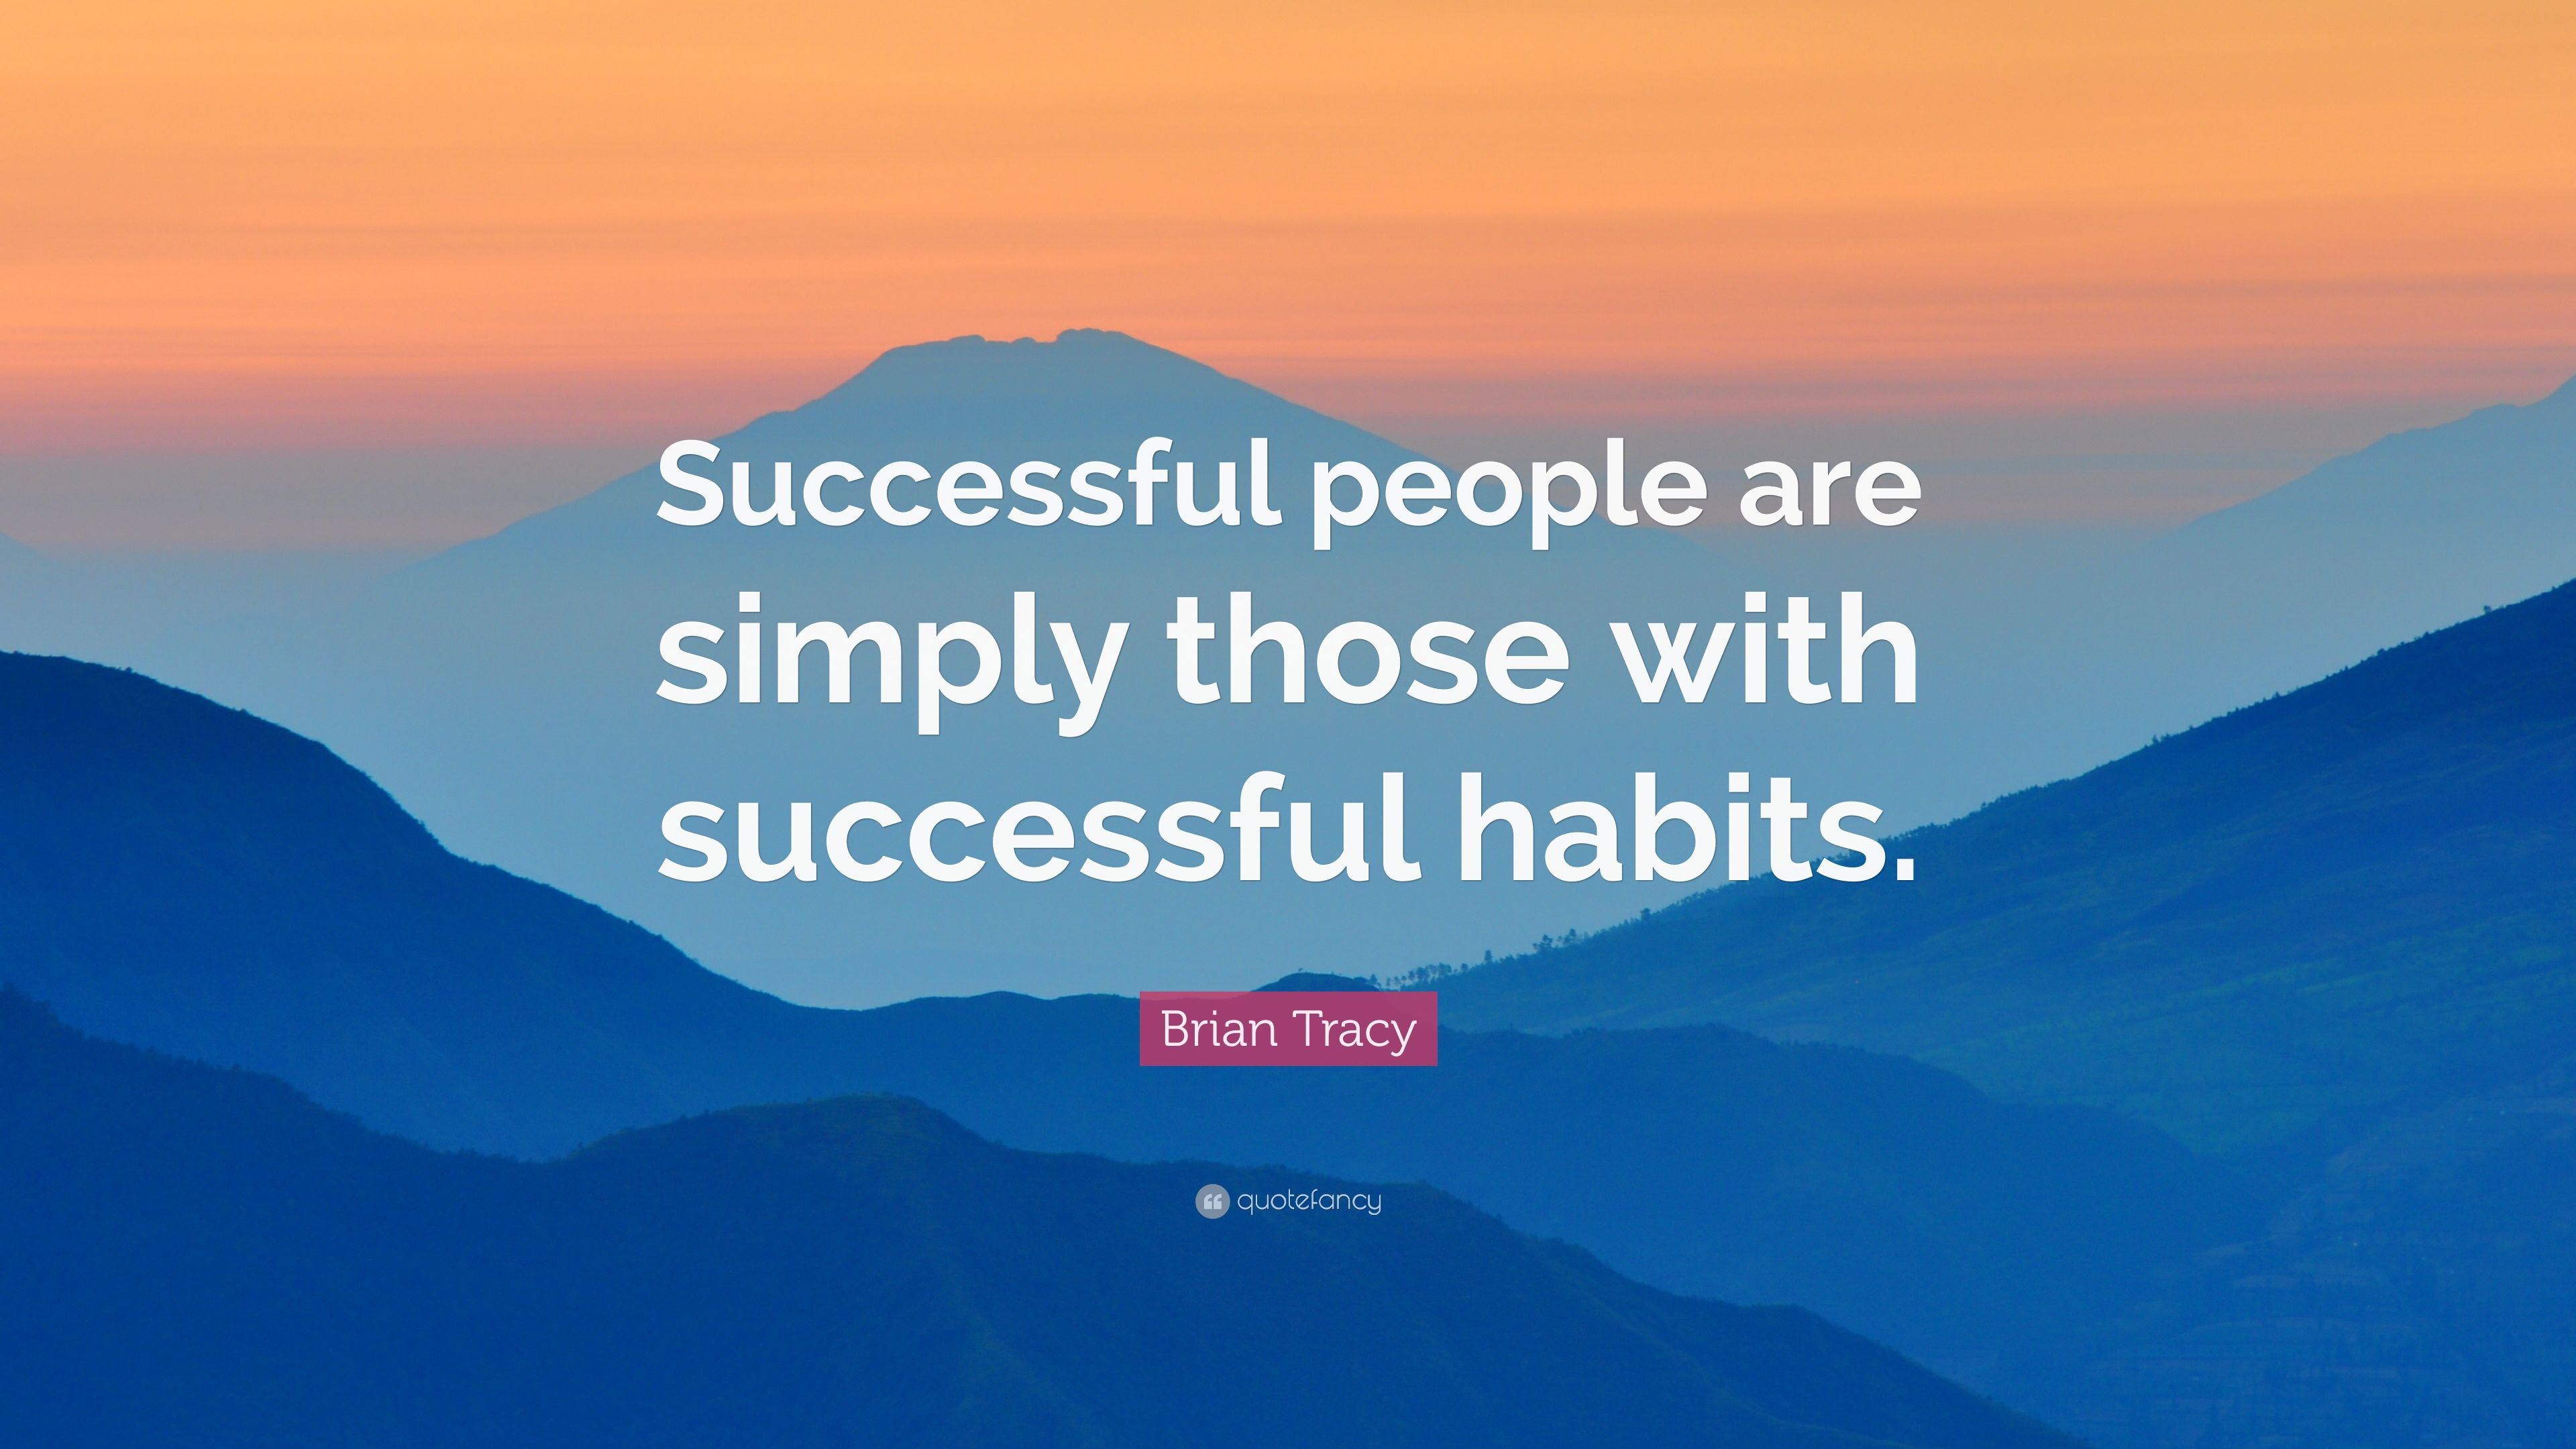 Brian Tracy Quote: “Successful people are simply those with successful habits.” (12 wallpaper)